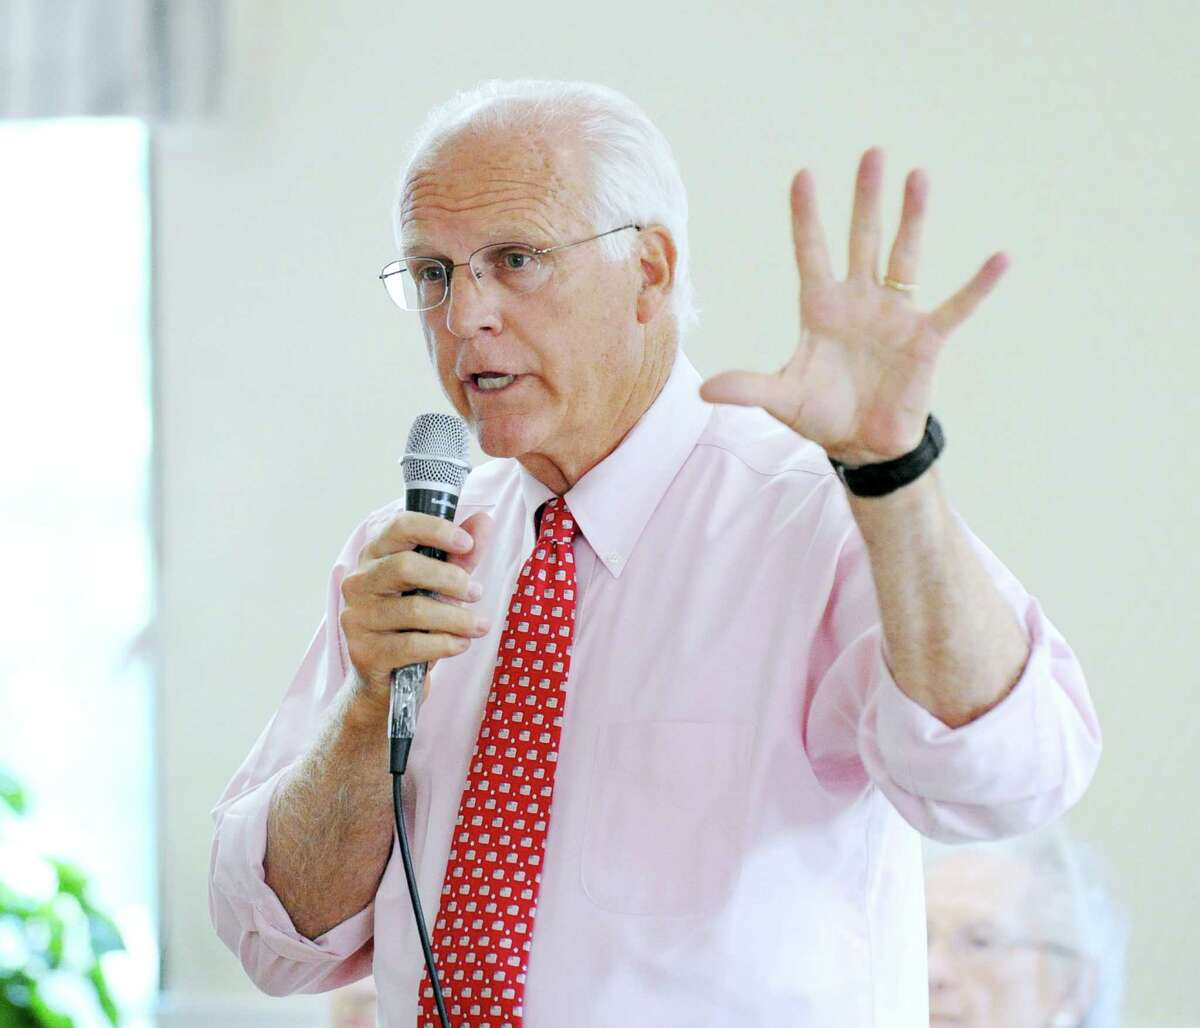 Former U.S. Rep. Christopher Shays speaks to residents at Atria Stamford, Wednesday, July 11, 2012. Shays is a candidate in the Republican primary for U.S. Senate against Linda McMahon.